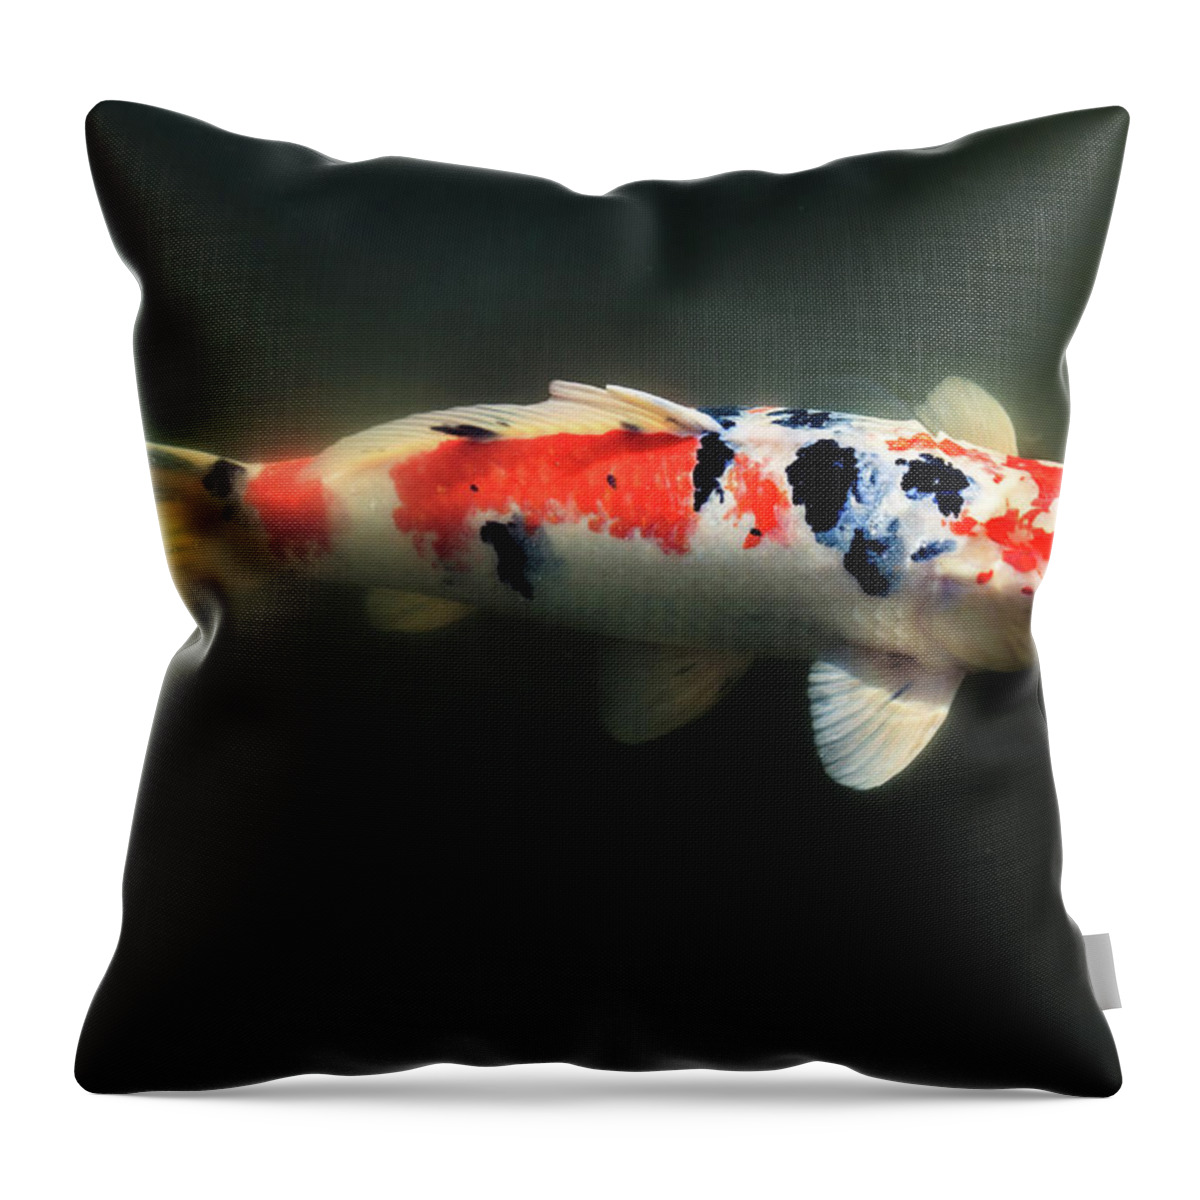 Japanese Garden Throw Pillow featuring the photograph Sanke Koi by Briand Sanderson